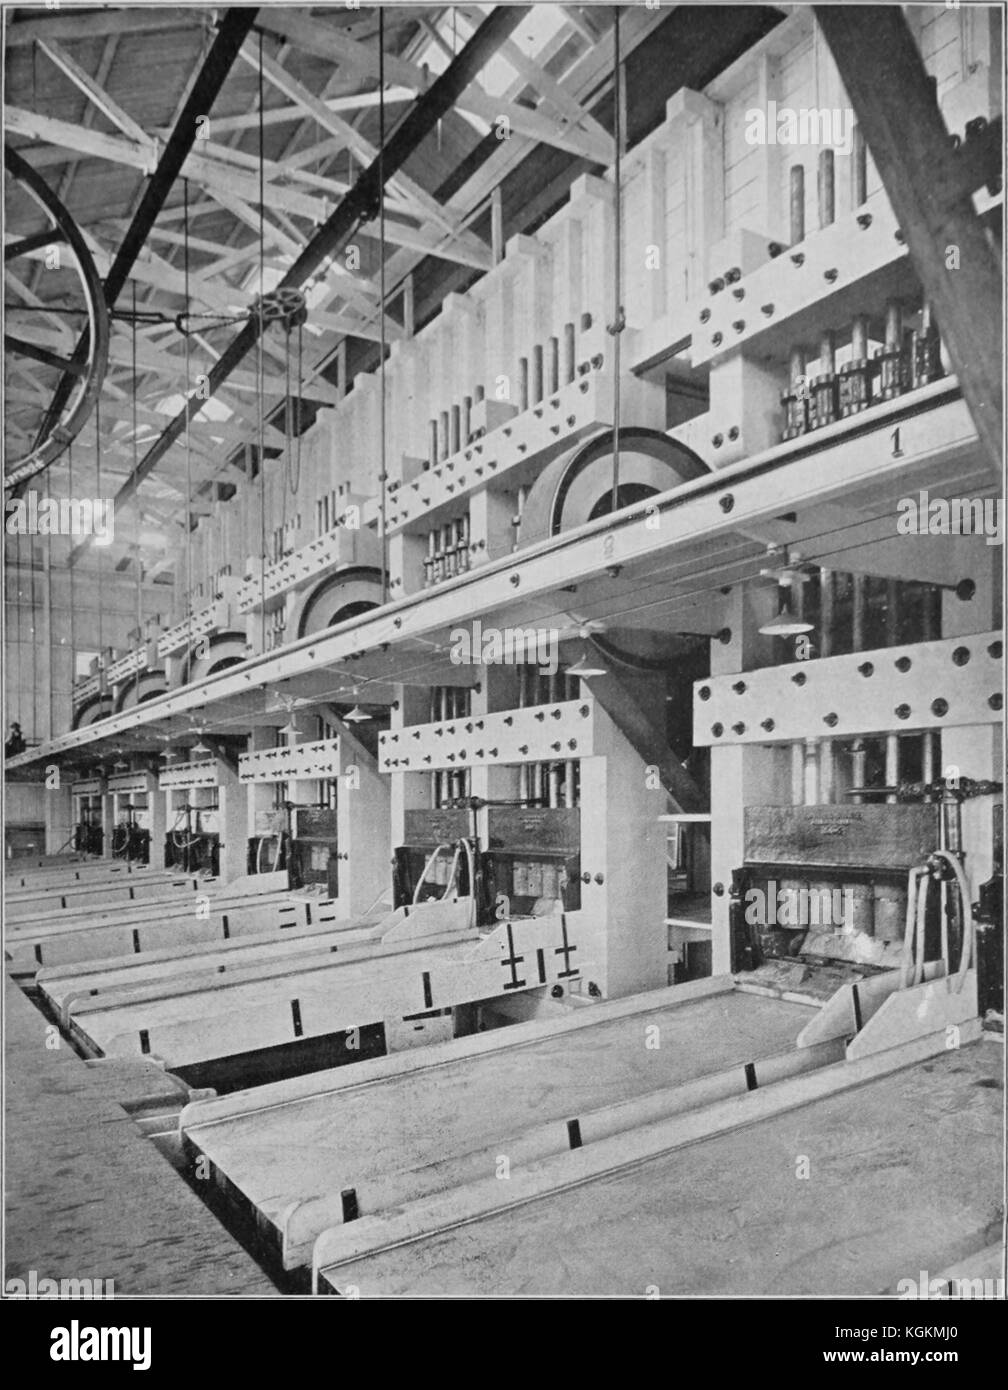 Photograph of row of stamp mills in a factory, used to process metal ores and other materials which need to be pulverized as part of an industrial process, 1891. Courtesy Internet Archive. Stock Photo